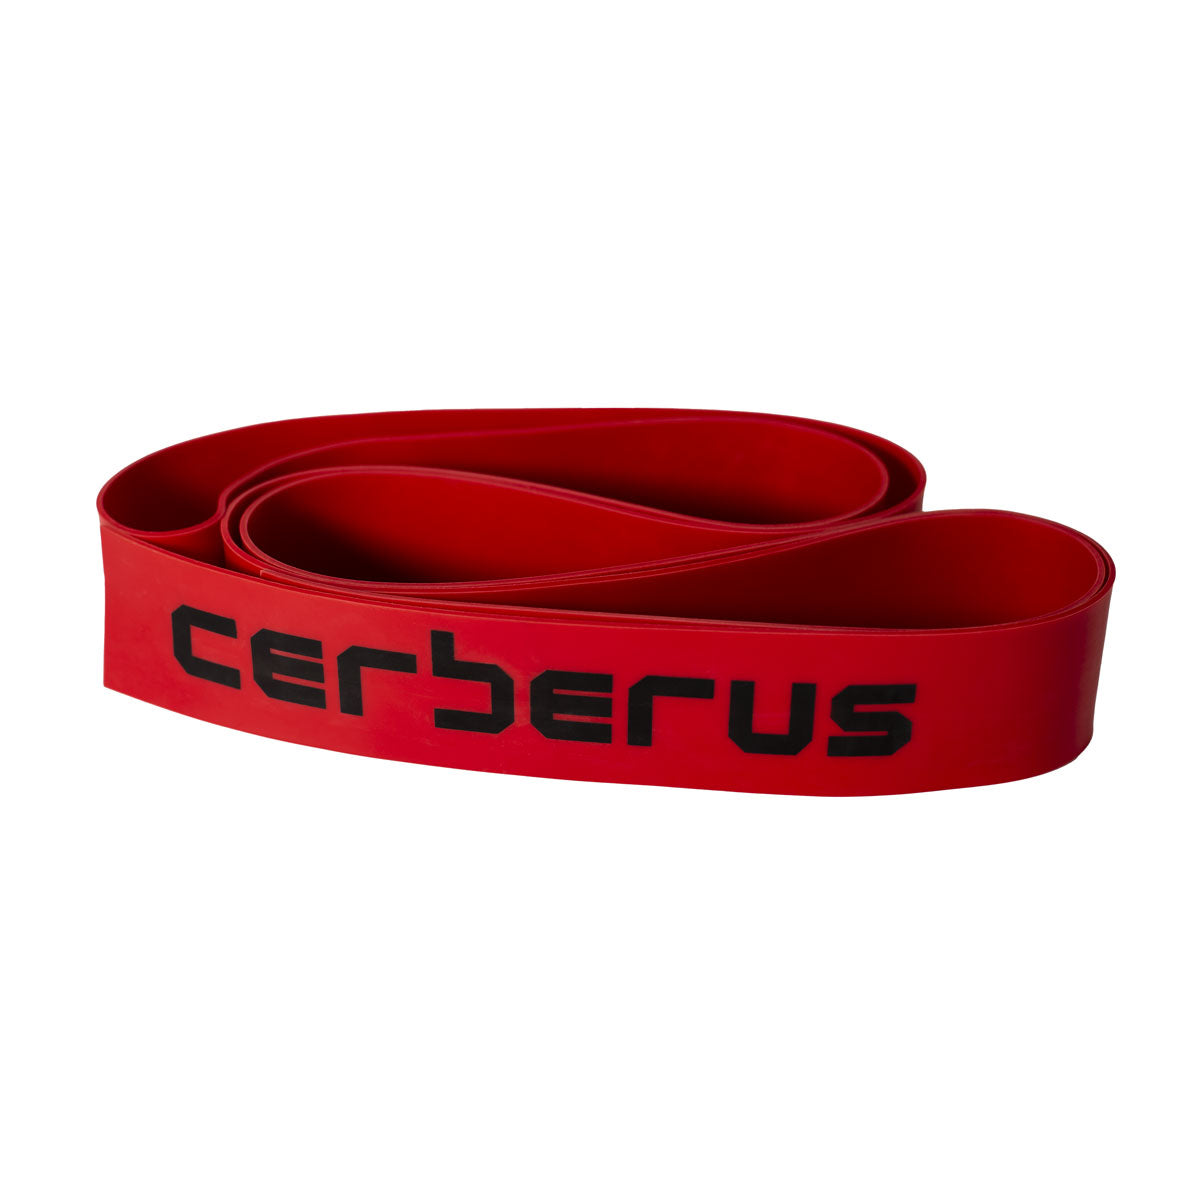 CERBERUS Muscle Floss Band